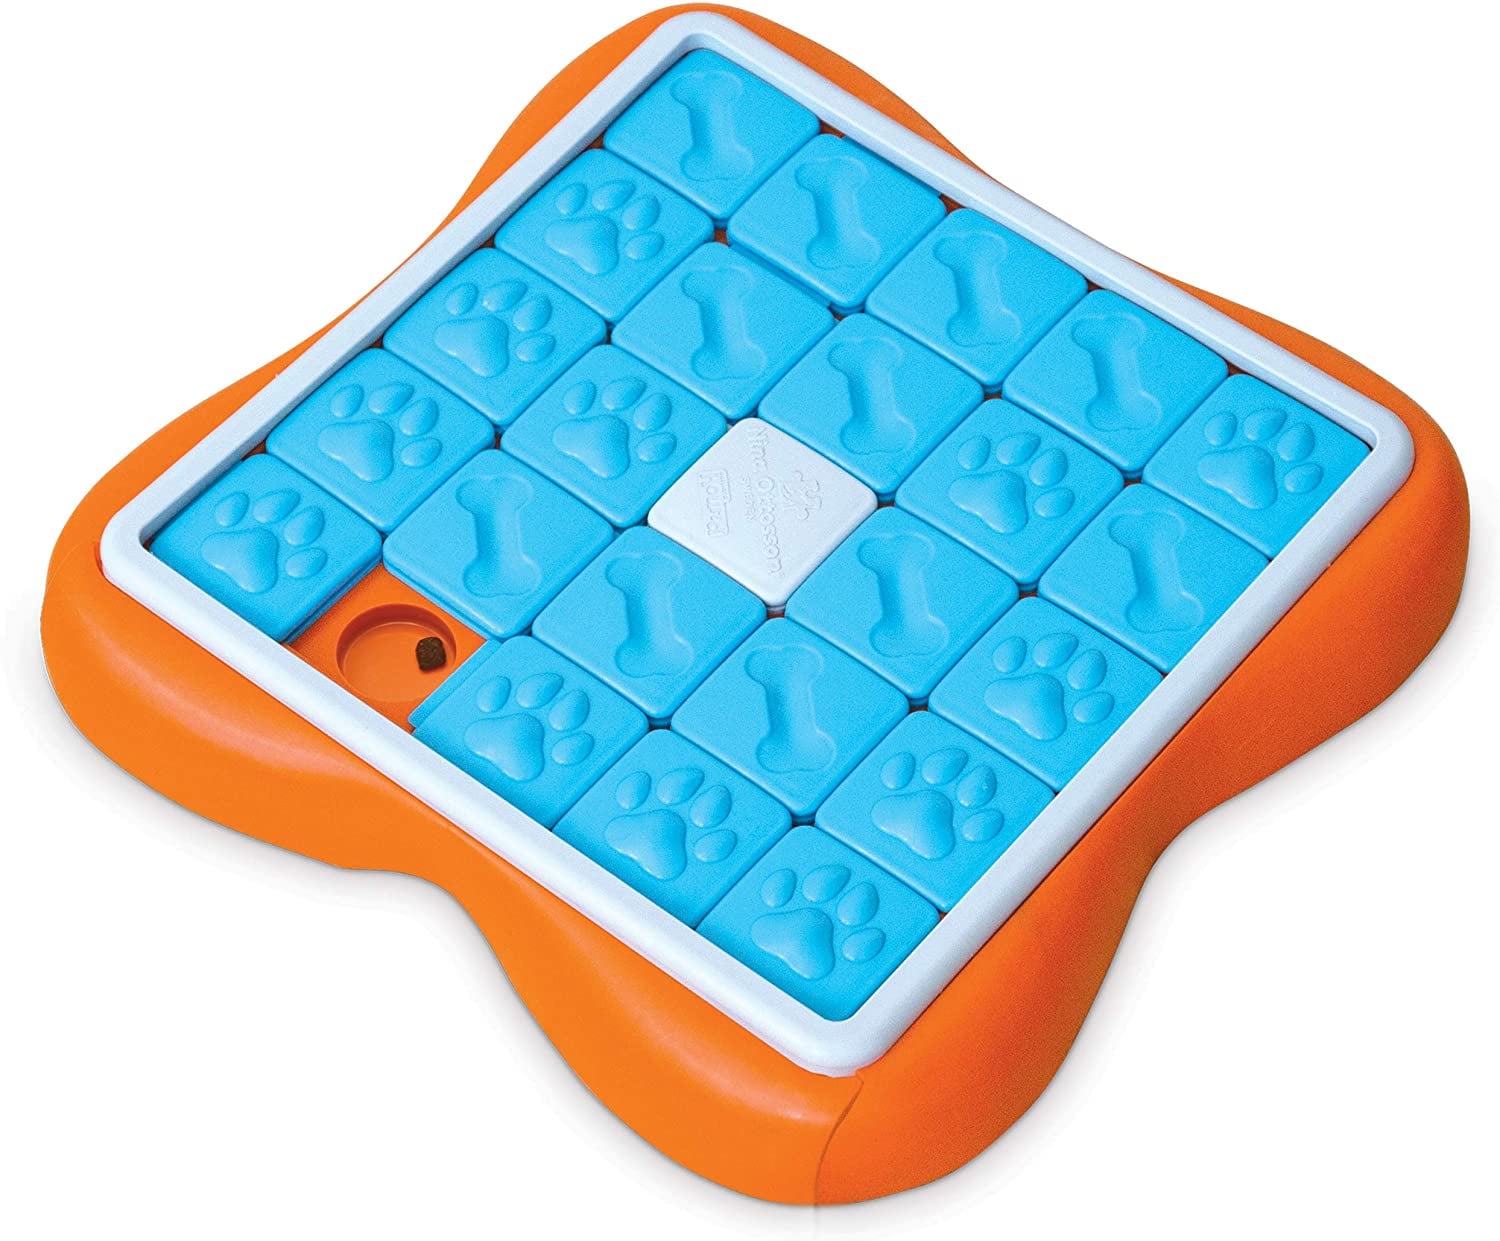 20 of the Best Puzzle Toys for Dogs - Holoka Home